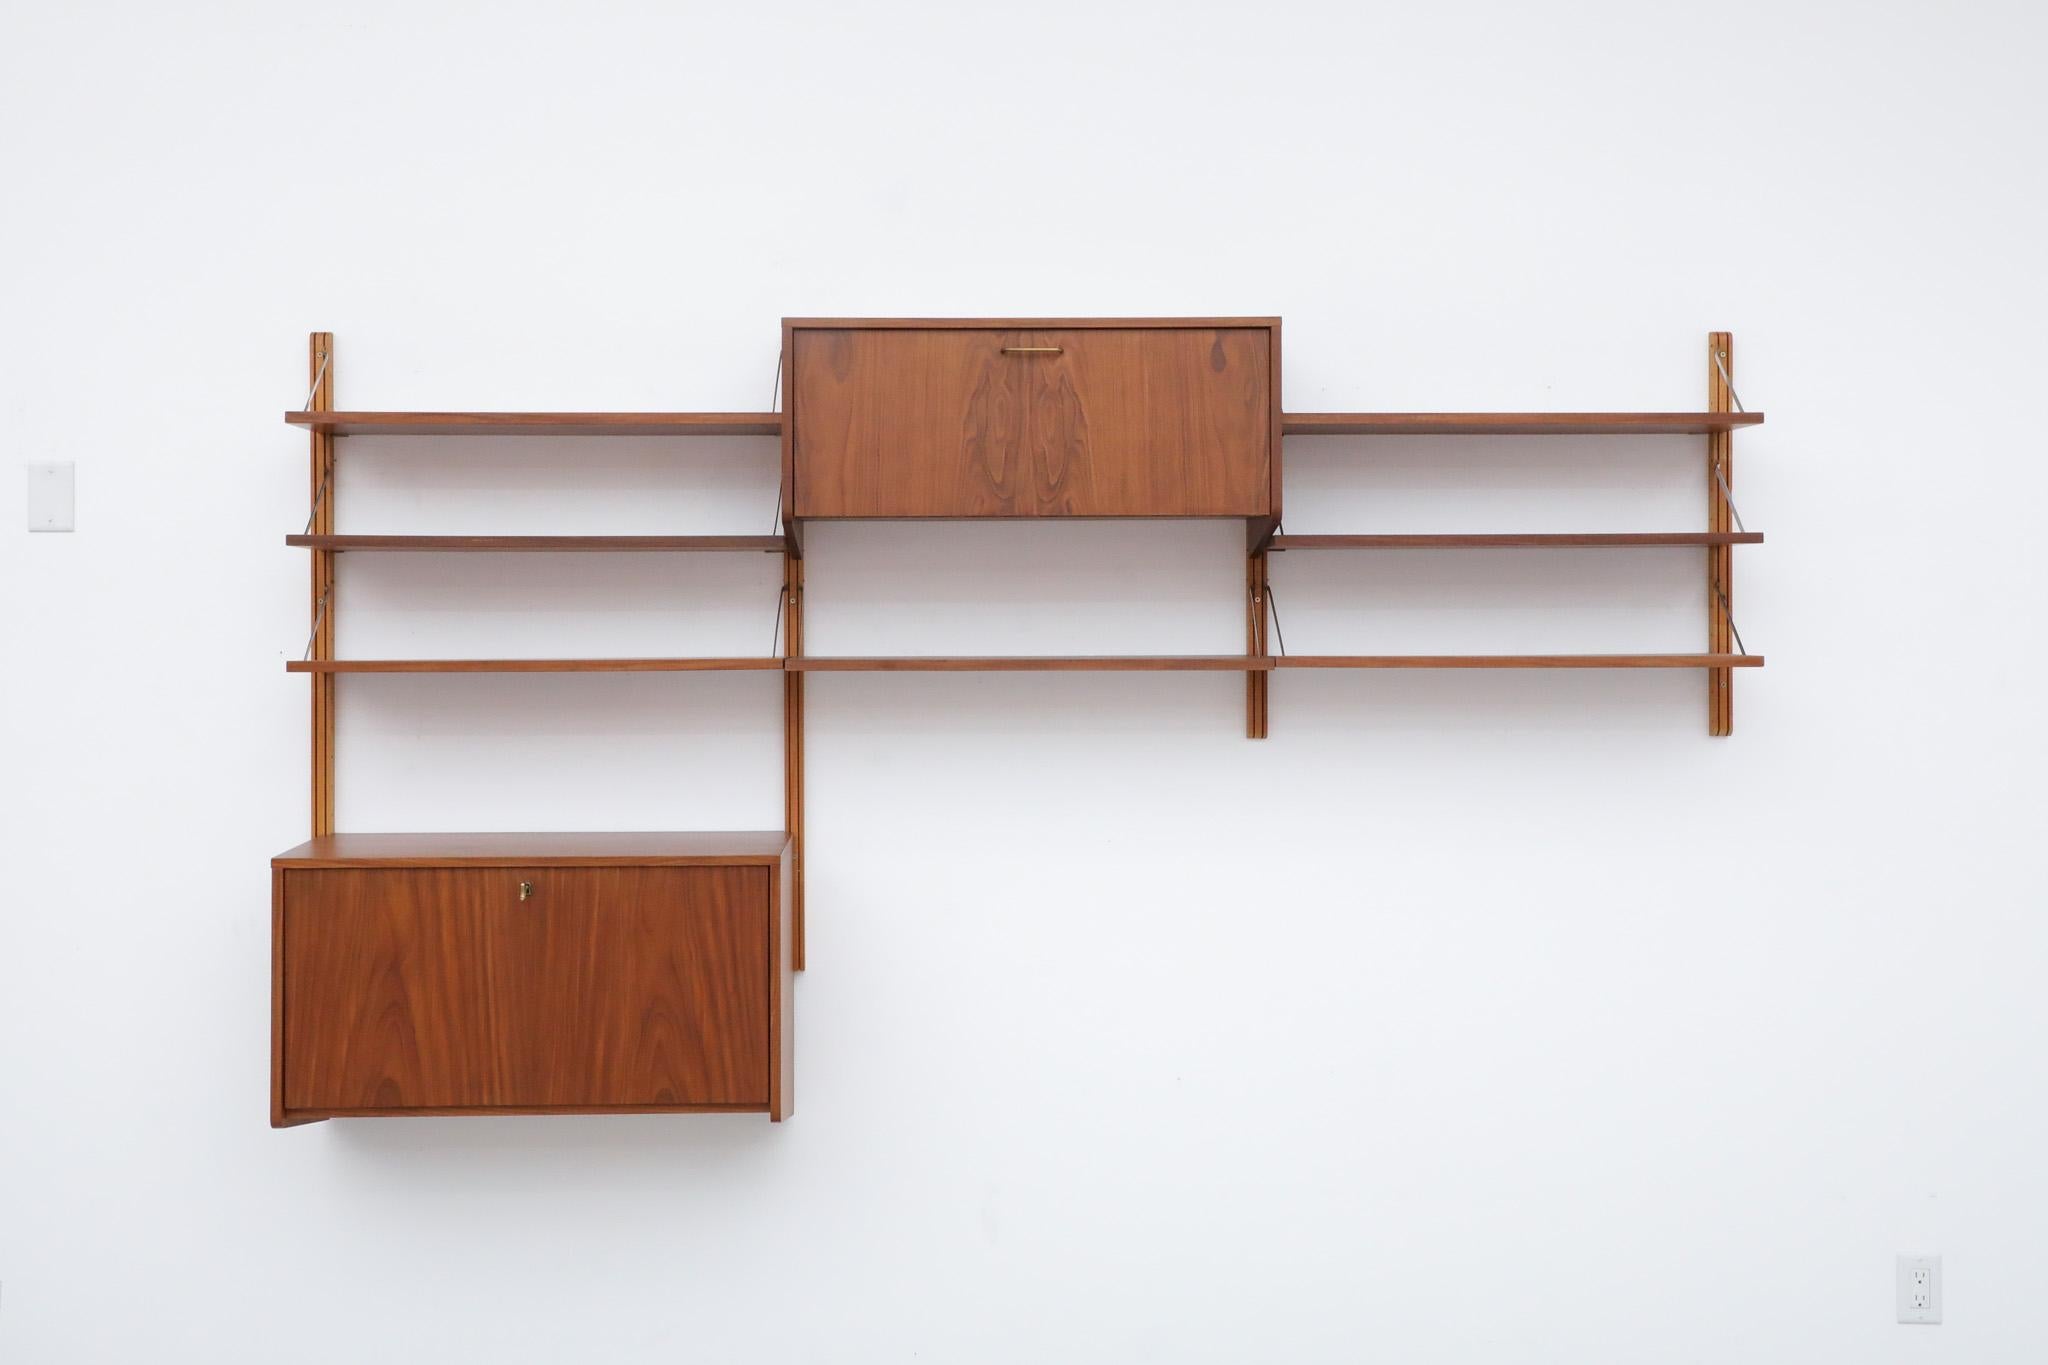 Stunning, Mid-Century, Poul Cadovius inspired teak wall mounted shelving system with attractive, brass risers and adjustable cabinets and shelves. A beautiful example of classic Mid-Century esthetics. The unit is in original condition with one